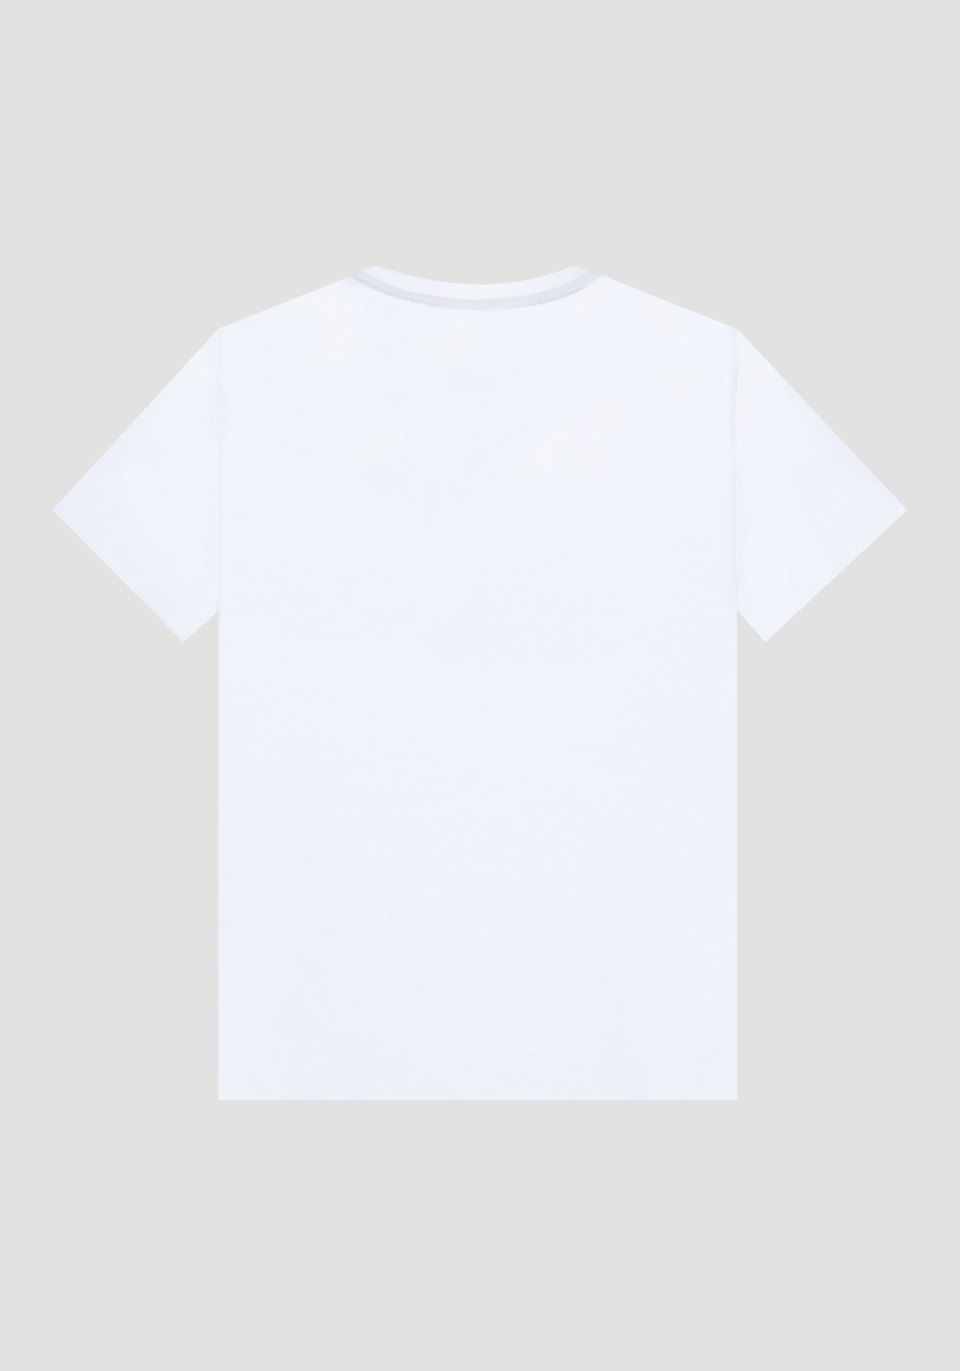 REGULAR-FIT T-SHIRT IN SOFT COTTON JERSEY WITH PRINT - Antony Morato Online Shop